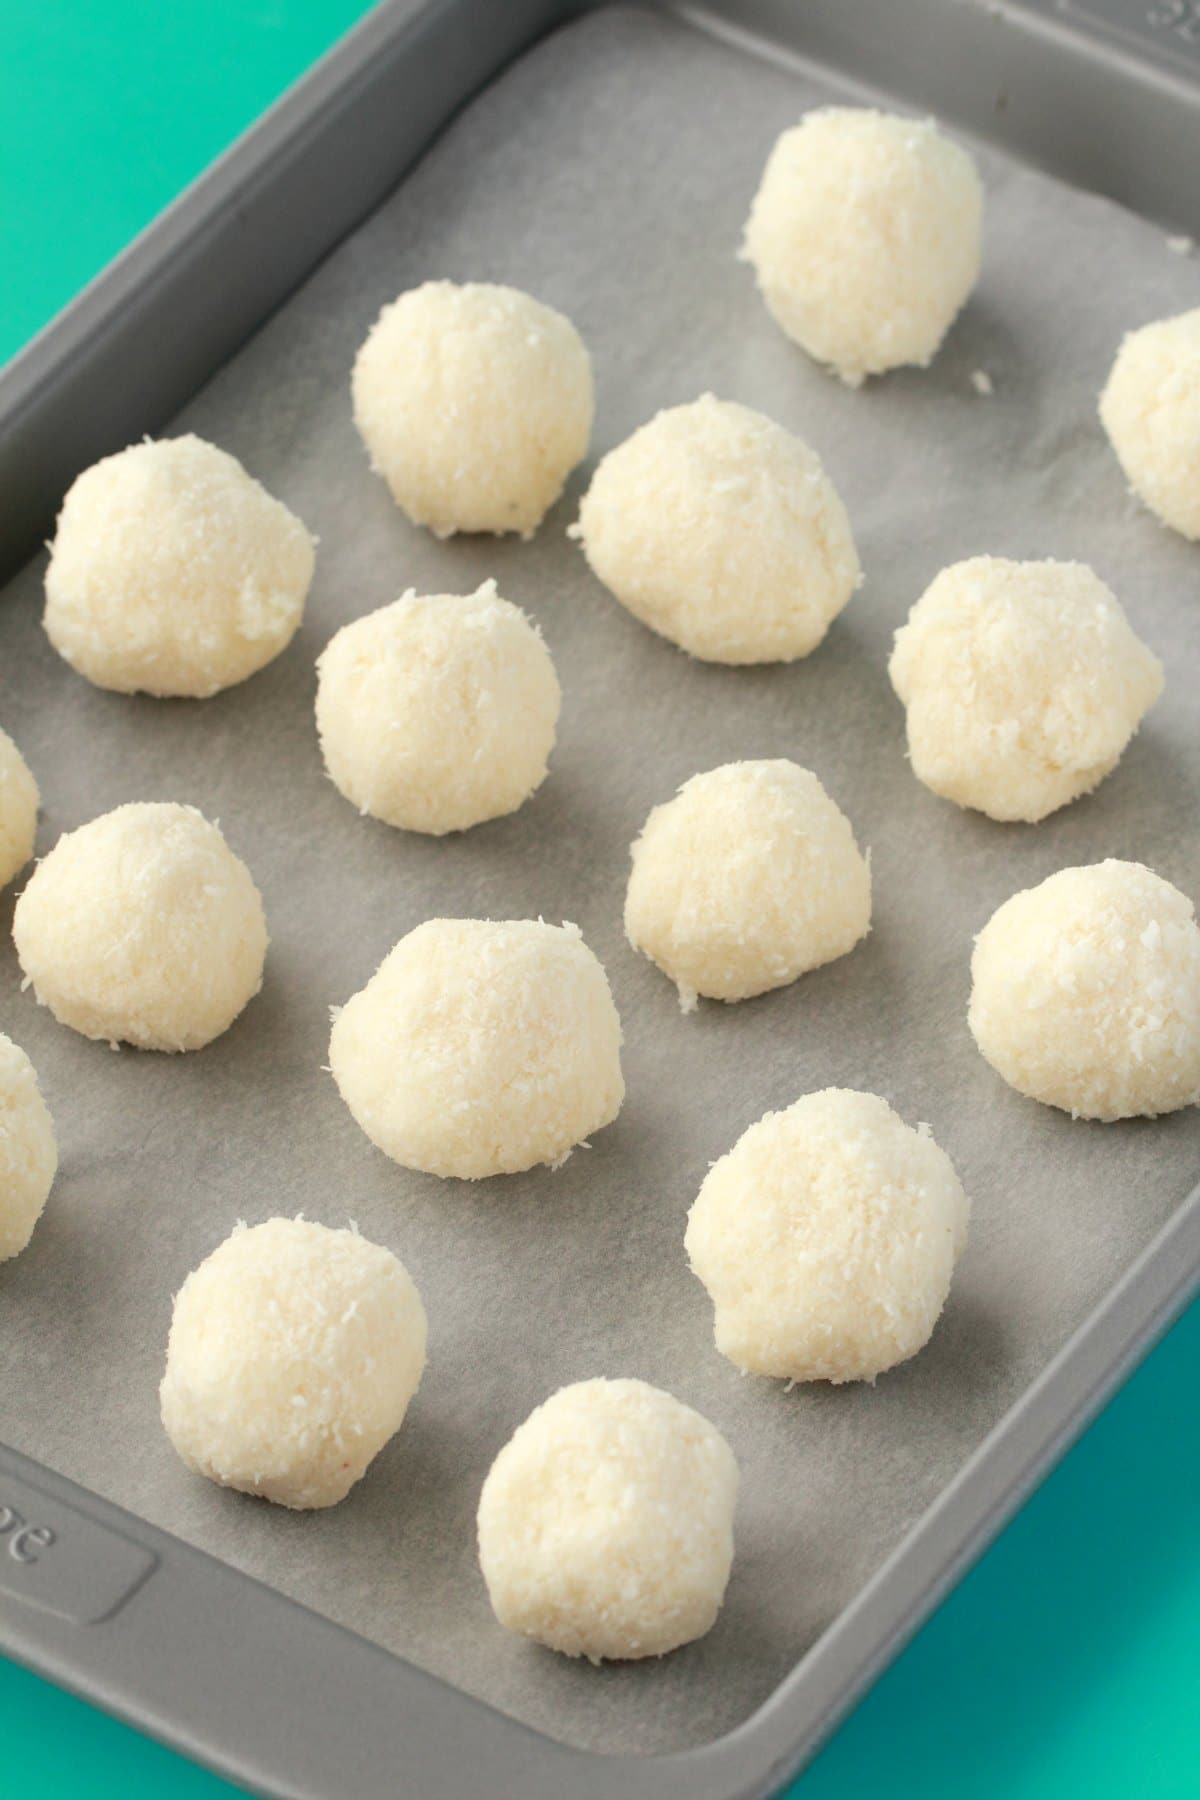 Vegan coconut truffles on a parchment lined baking tray